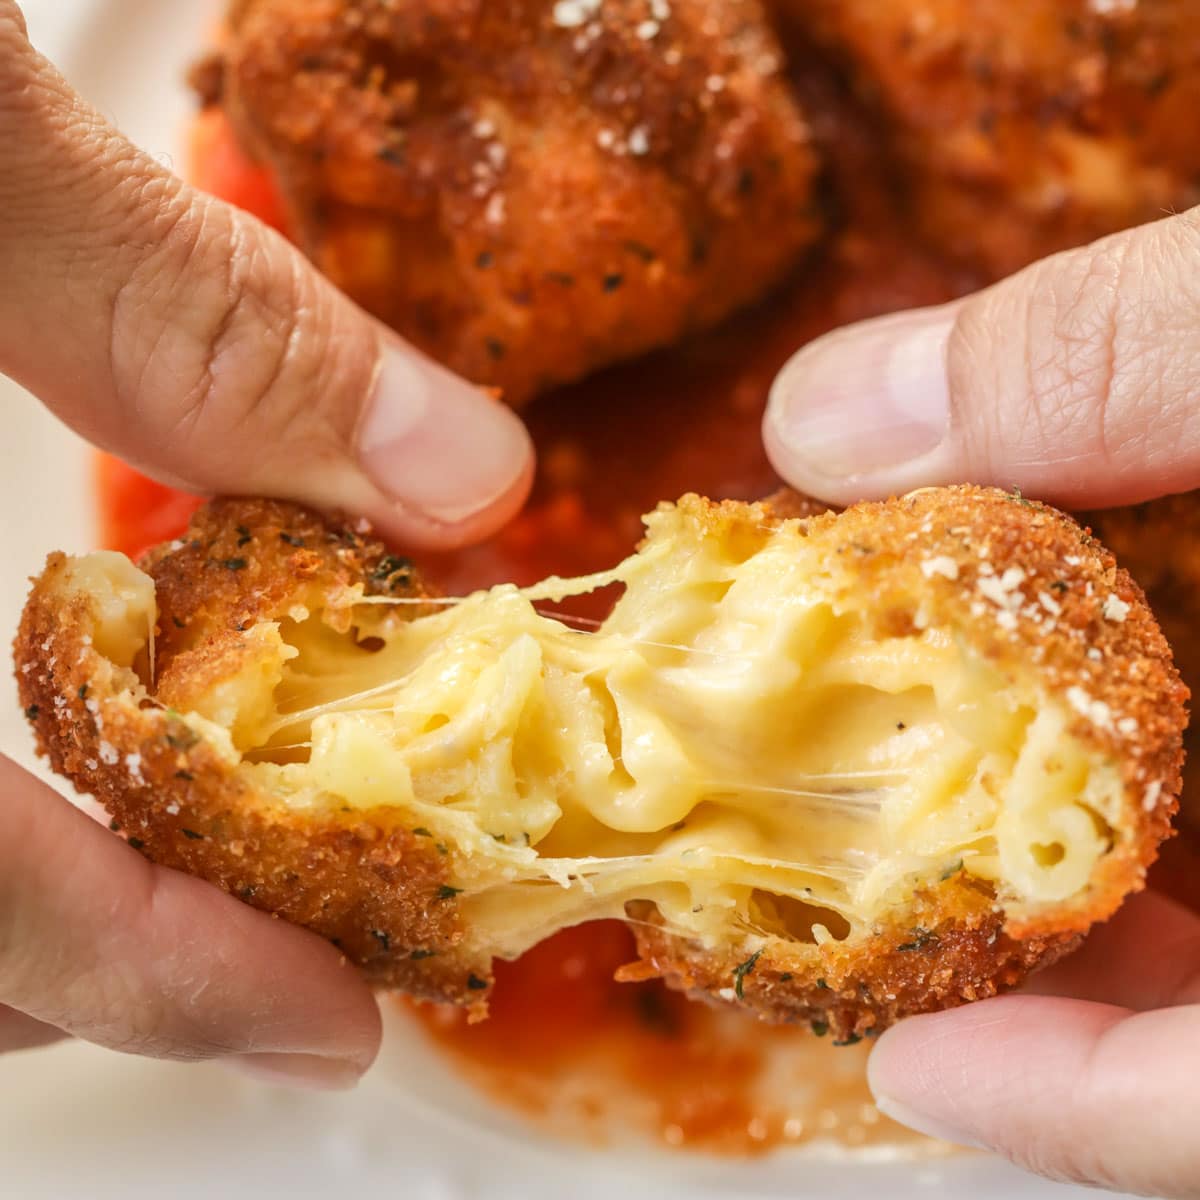 Hands pulling apart a fried mac and cheese ball